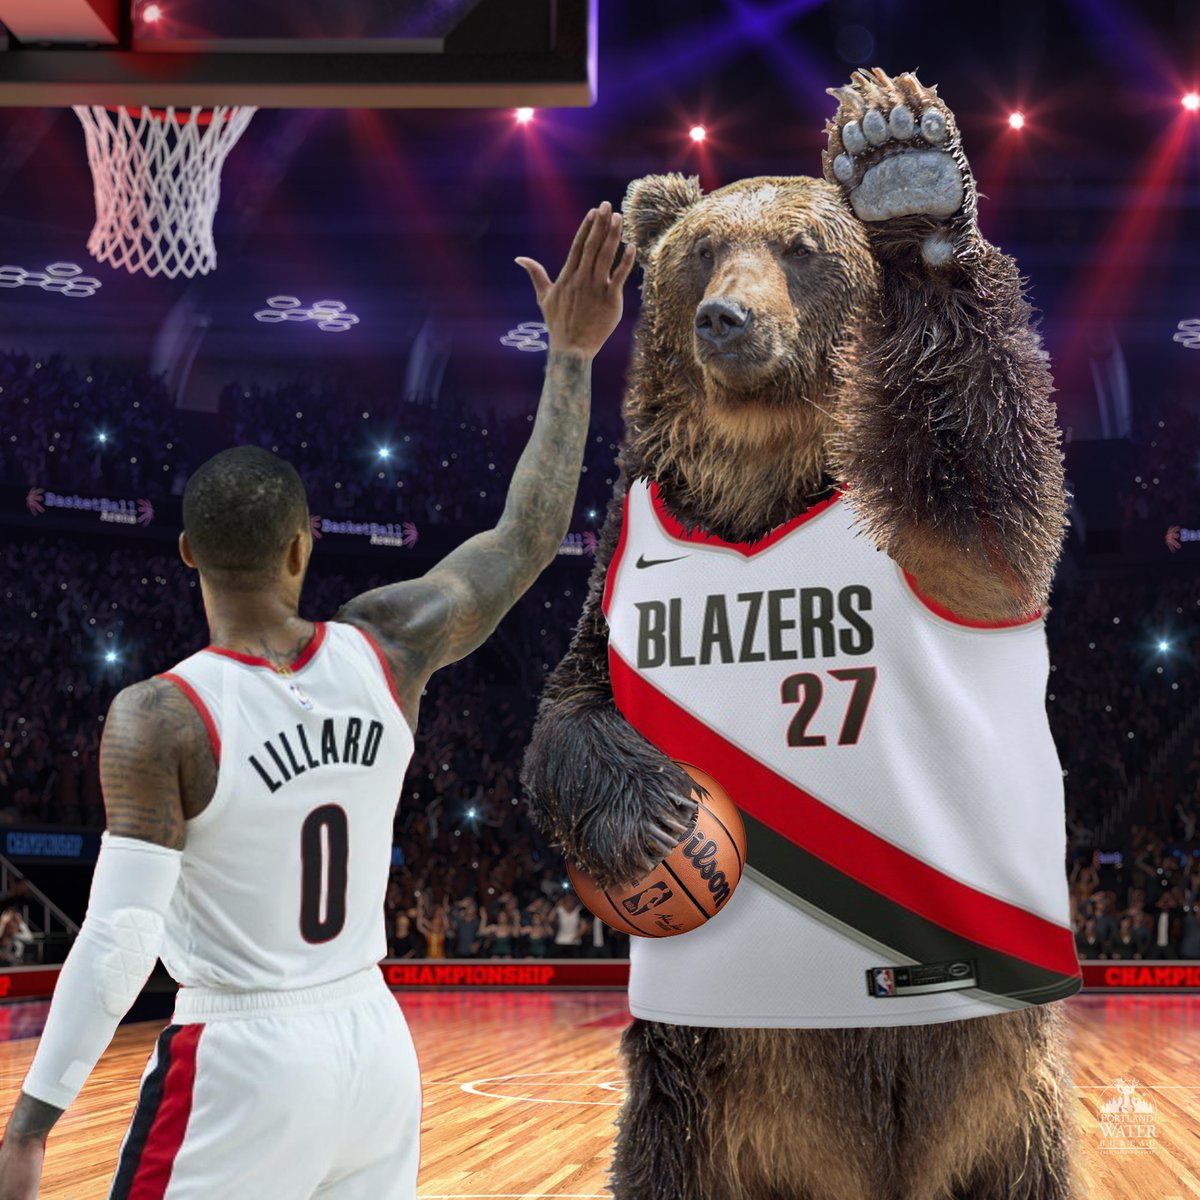 What's your favorite nickname for Jusuf Nurkic?

@bosnianbeast27? How about when @kevincalabro
 calls him the “Dancing Bear?” That’s our favorite.  

We protect bear habitat in the Bull Run Watershed like Nurk protects the rim. 

@trailblazers preview: https://t.co/WSdY9Sw15G https://t.co/VLjljv0tJL